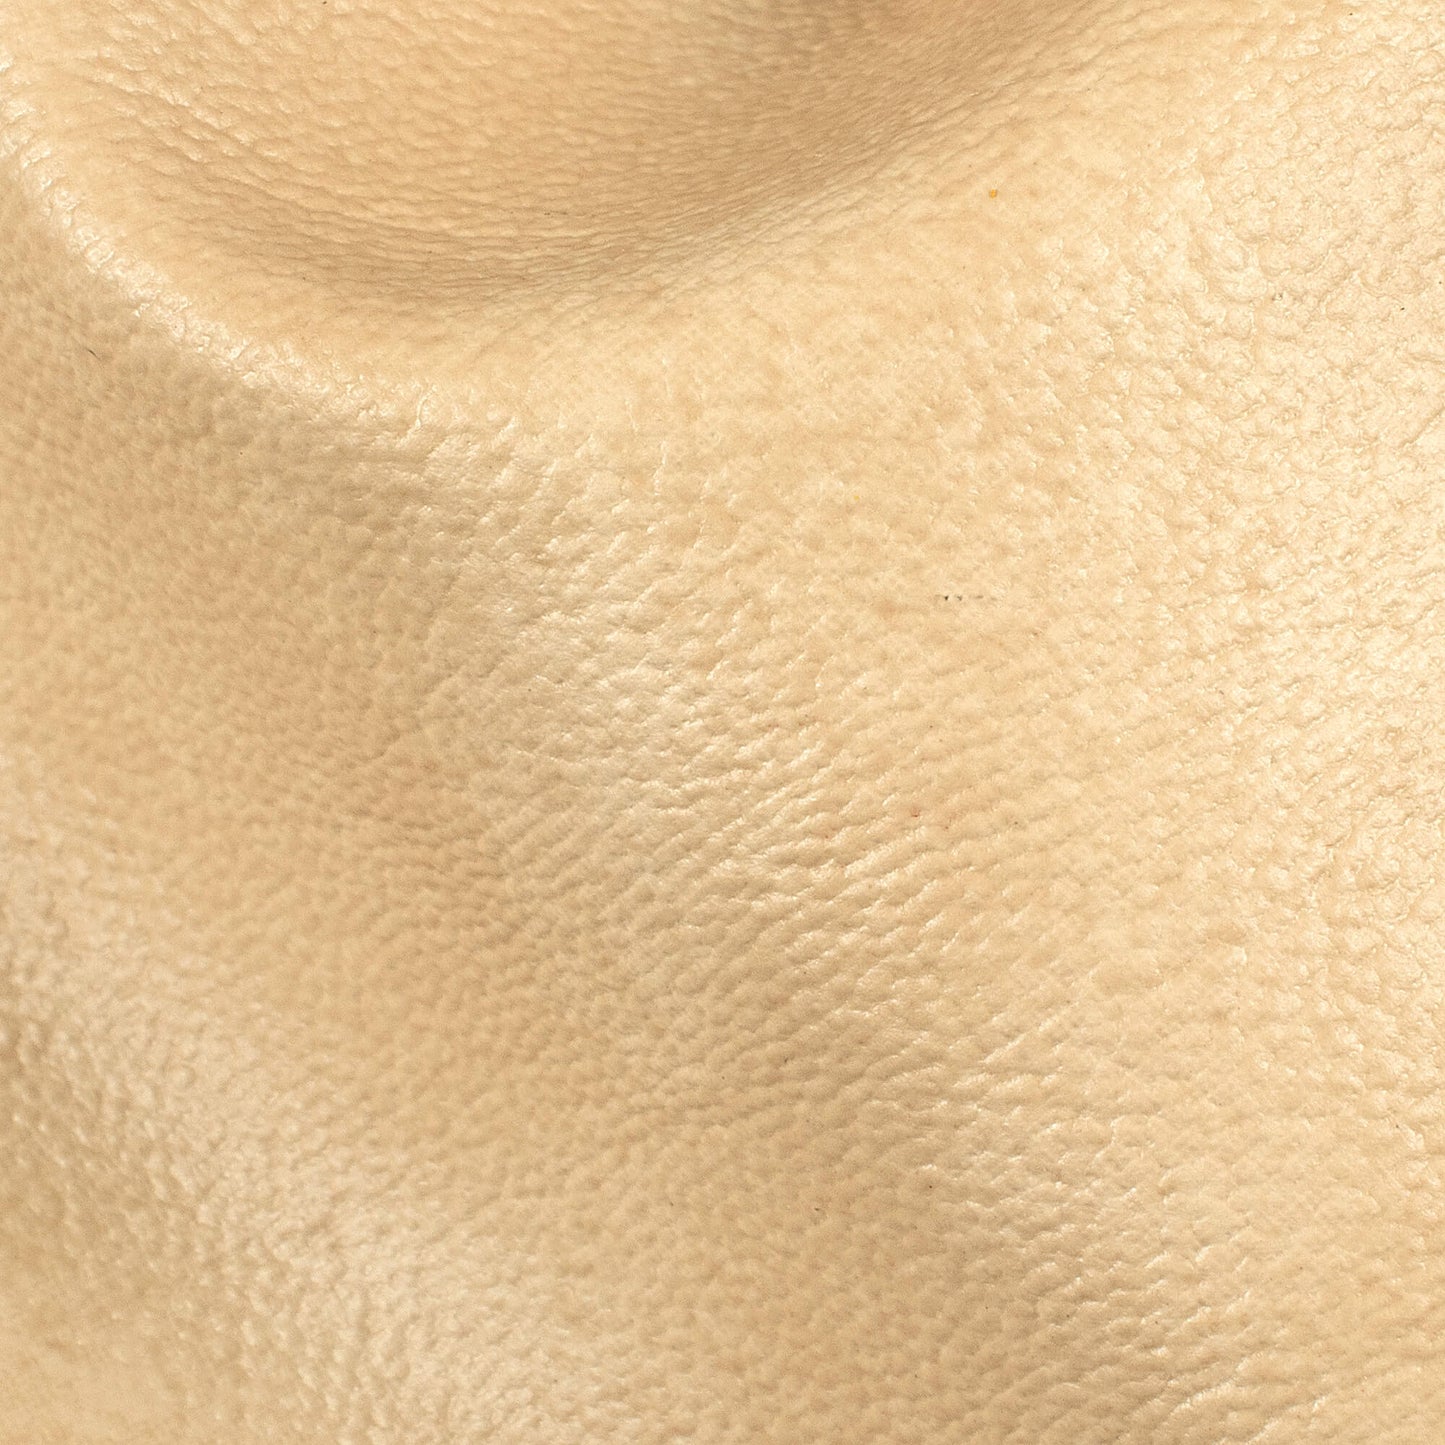 Tan Beige Self Textured Exclusive Sofa Fabric (Width 54 Inches)